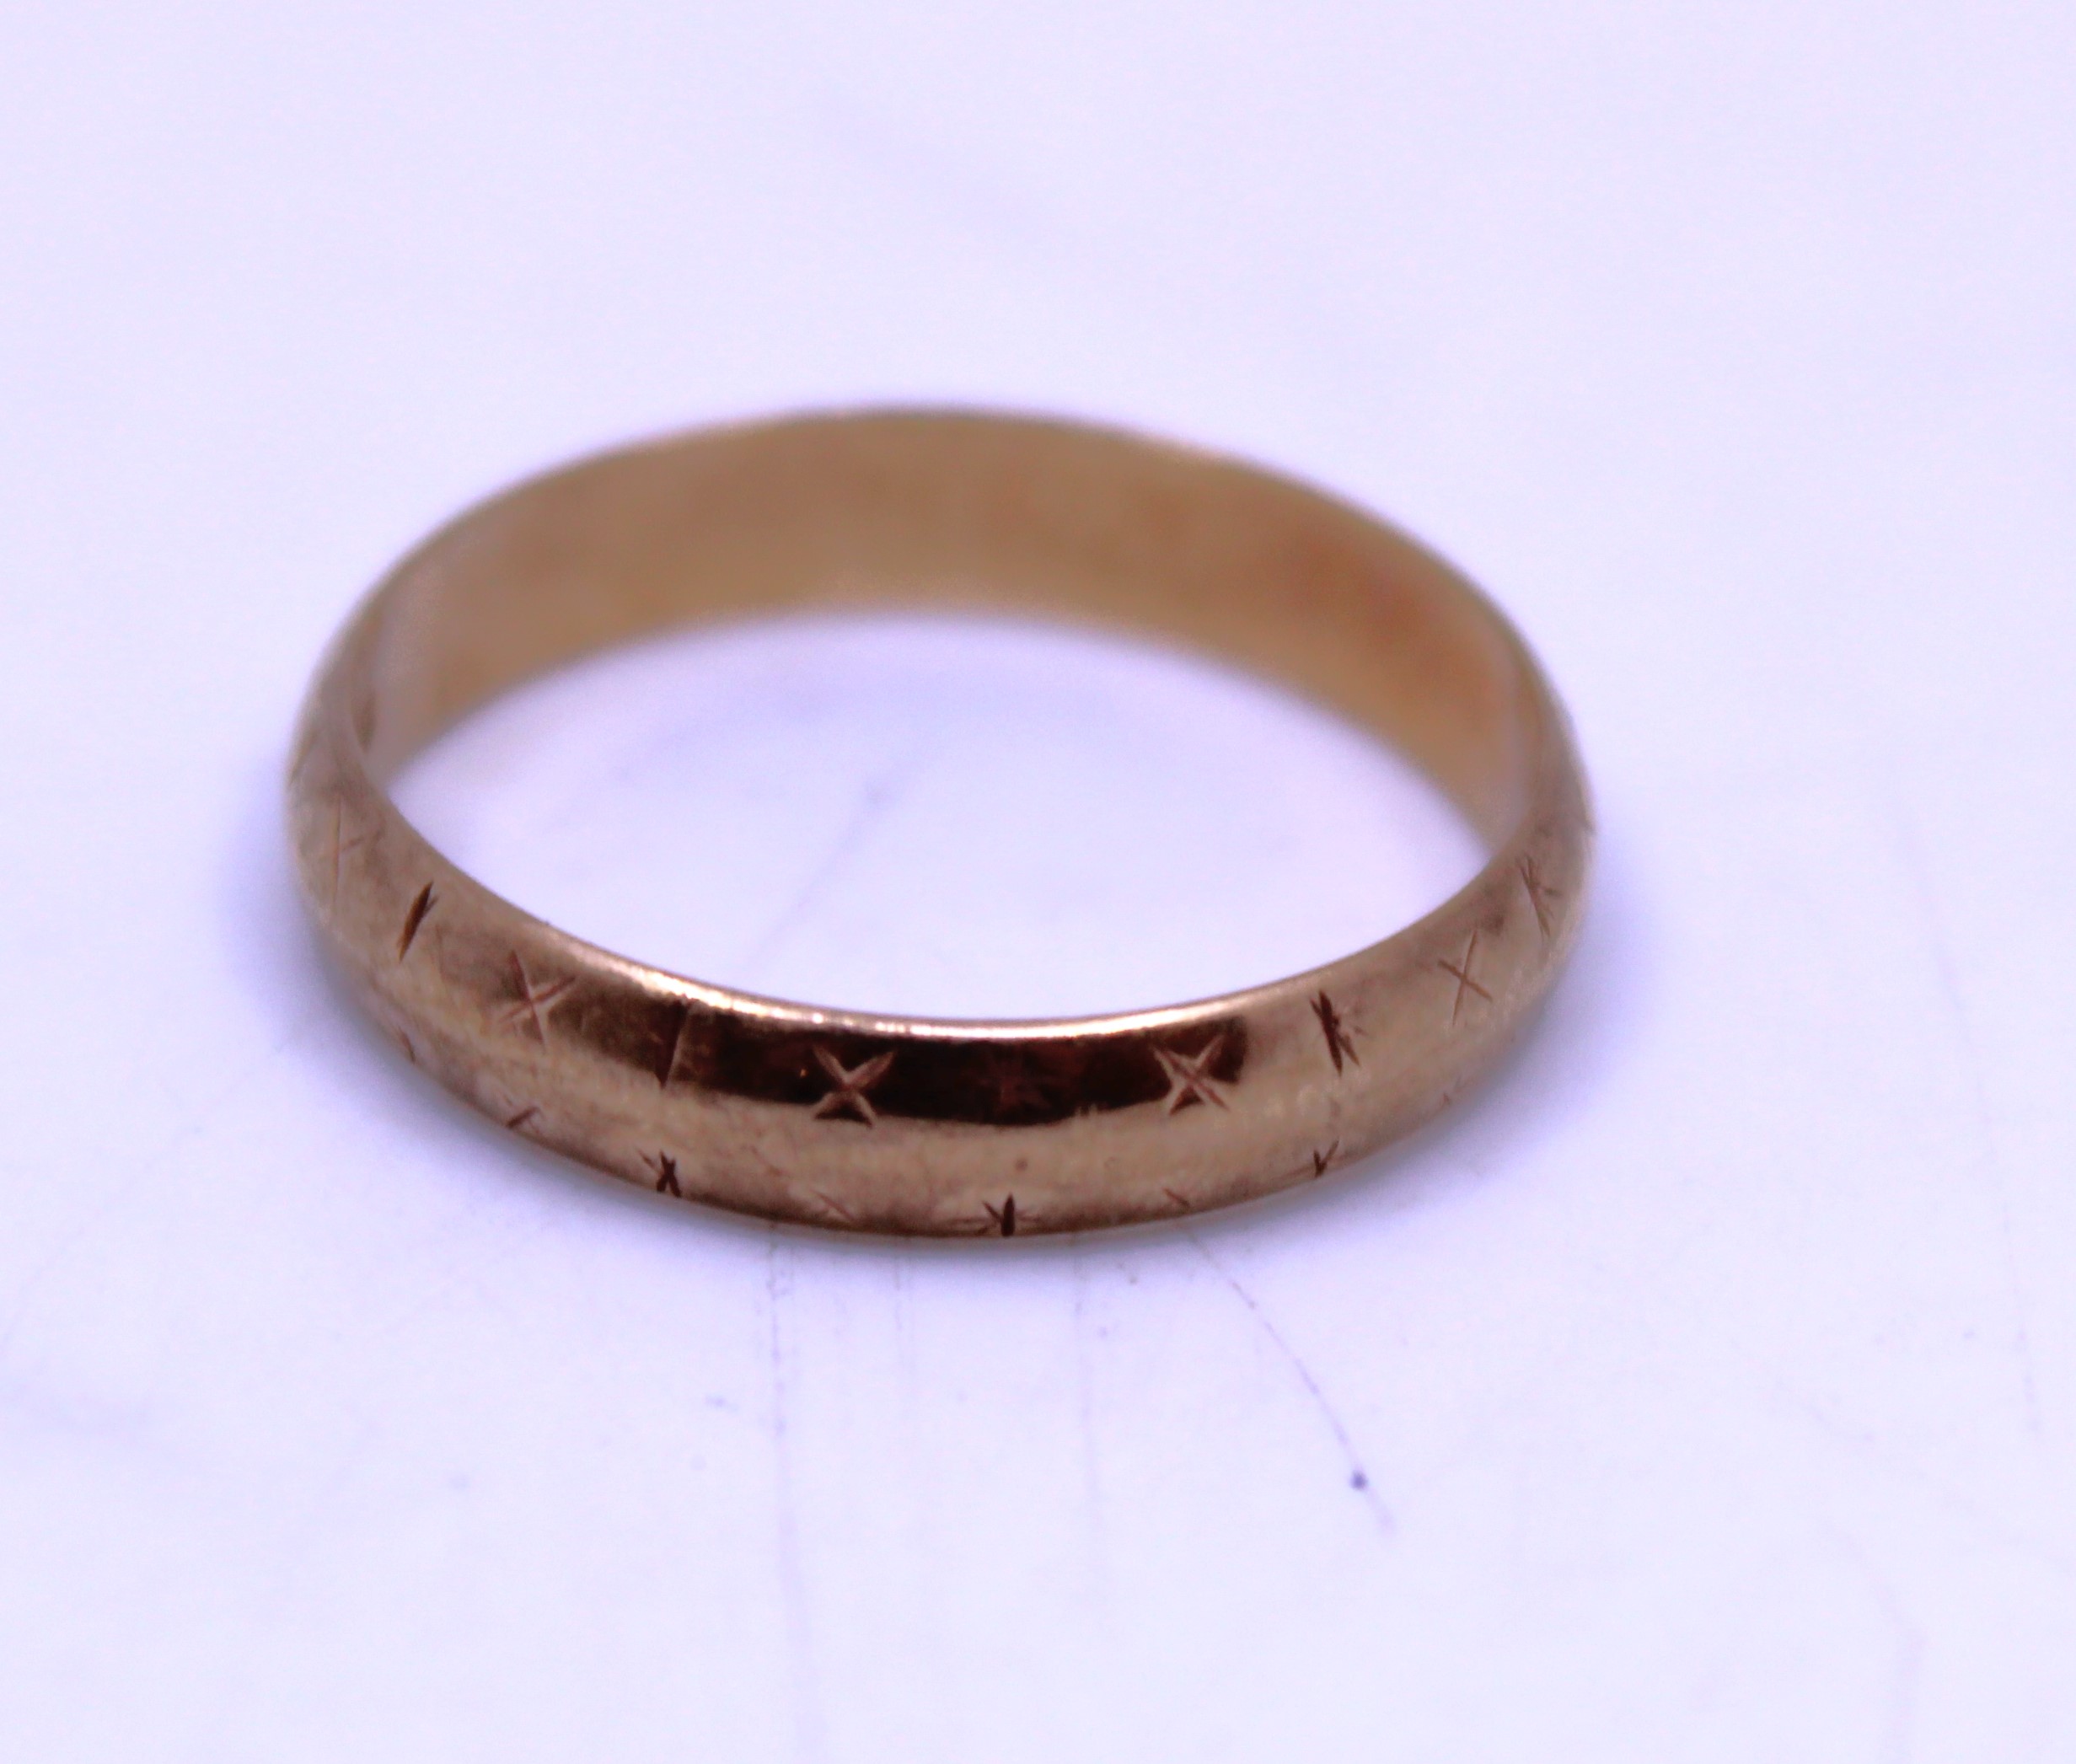 9ct Gold Wedding Band and 9ct Gold Knot Ring.   They are both hallmarked "375" for 9ct Gold.  The - Image 2 of 3